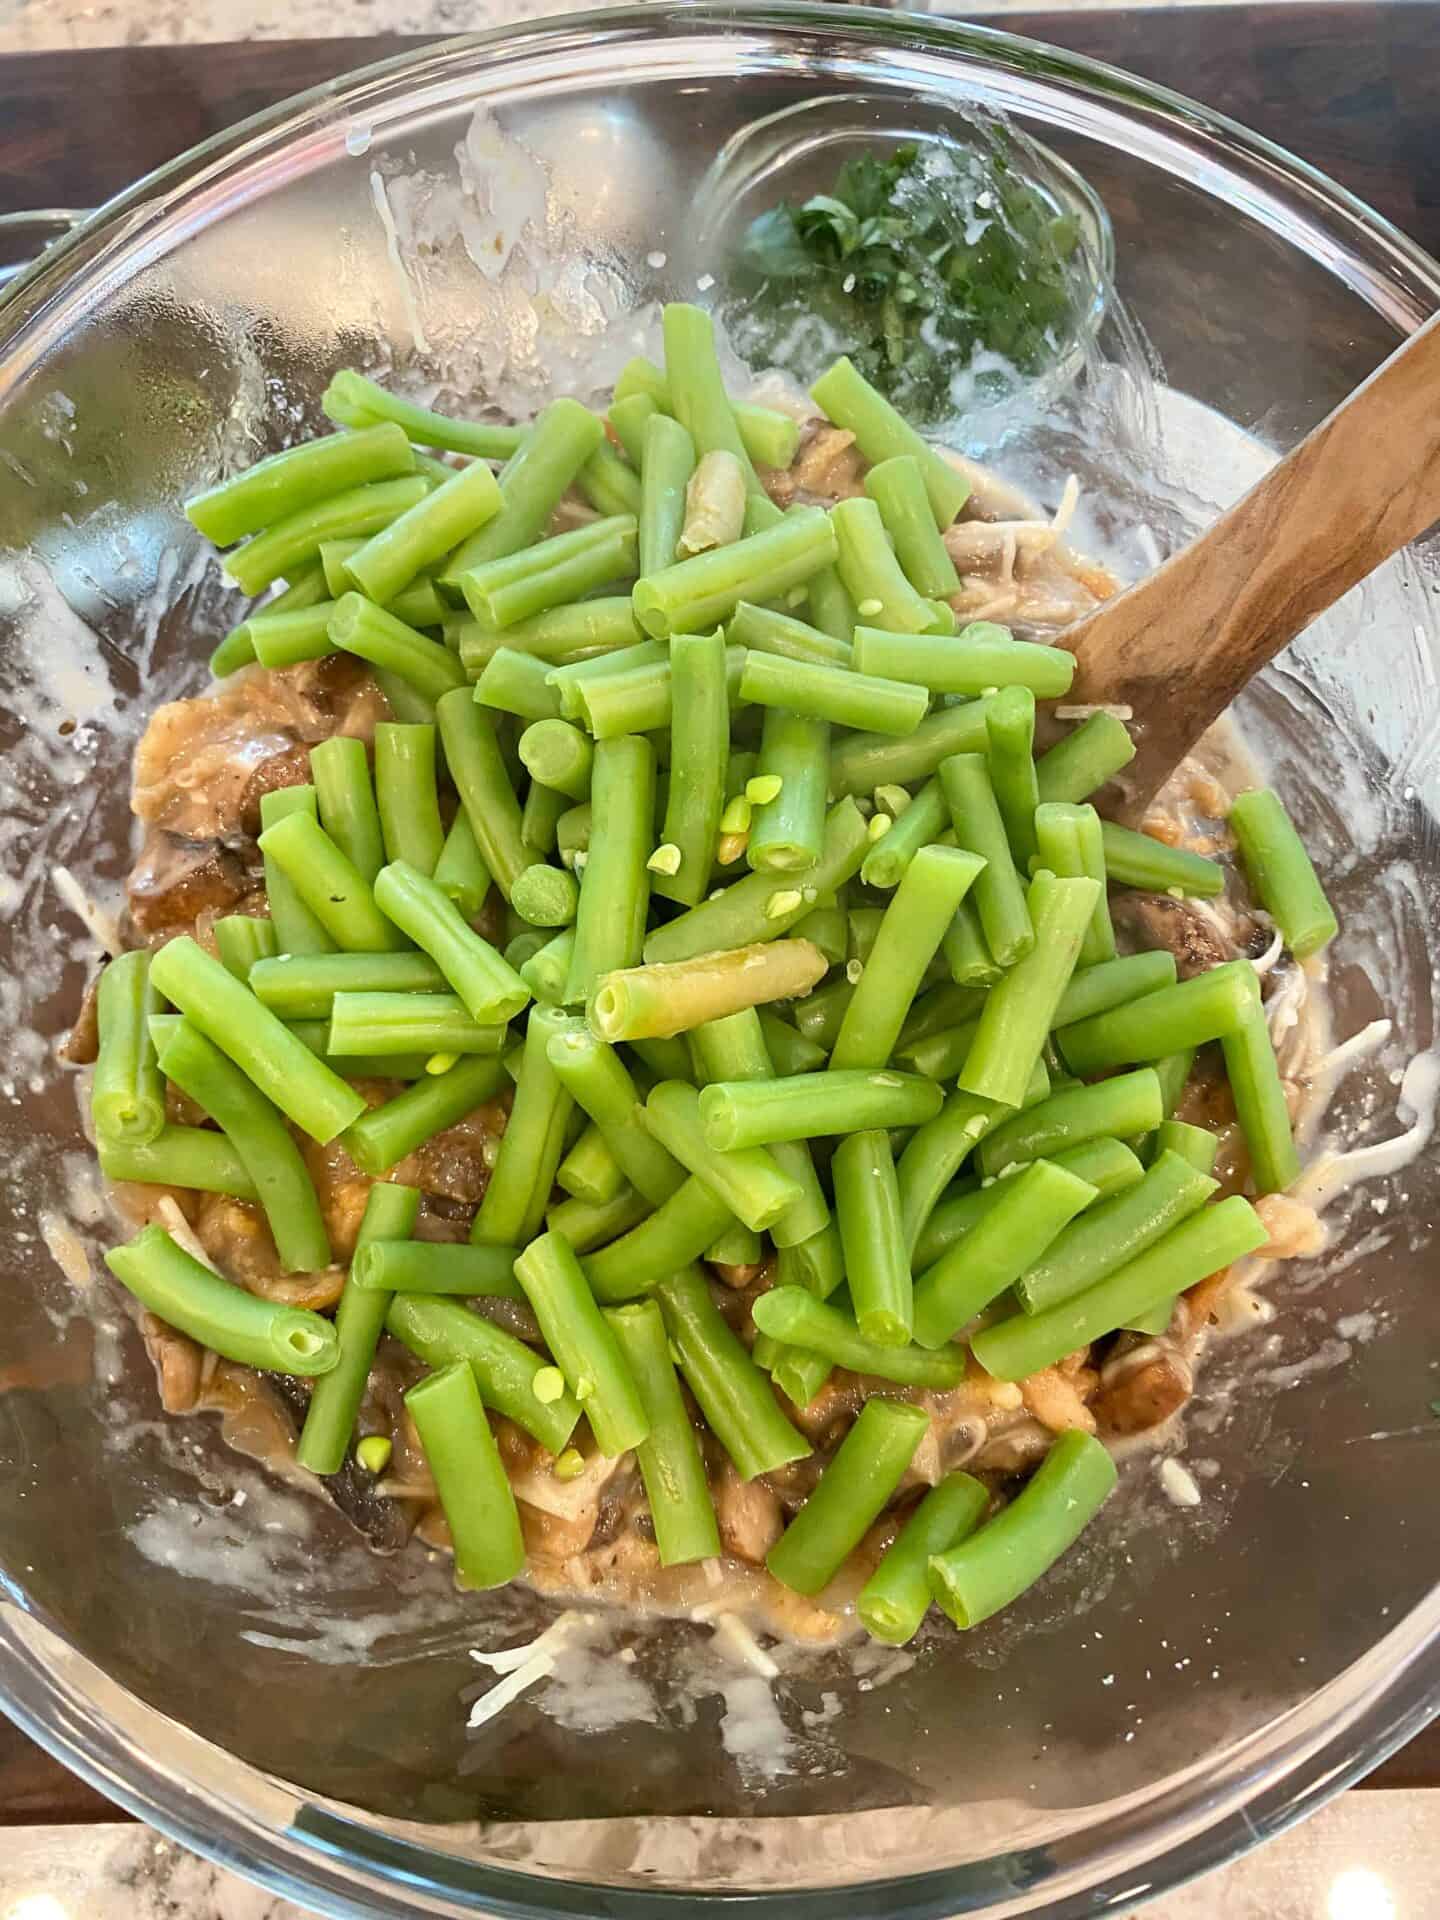 mix cooked green beans into mushroom mixture